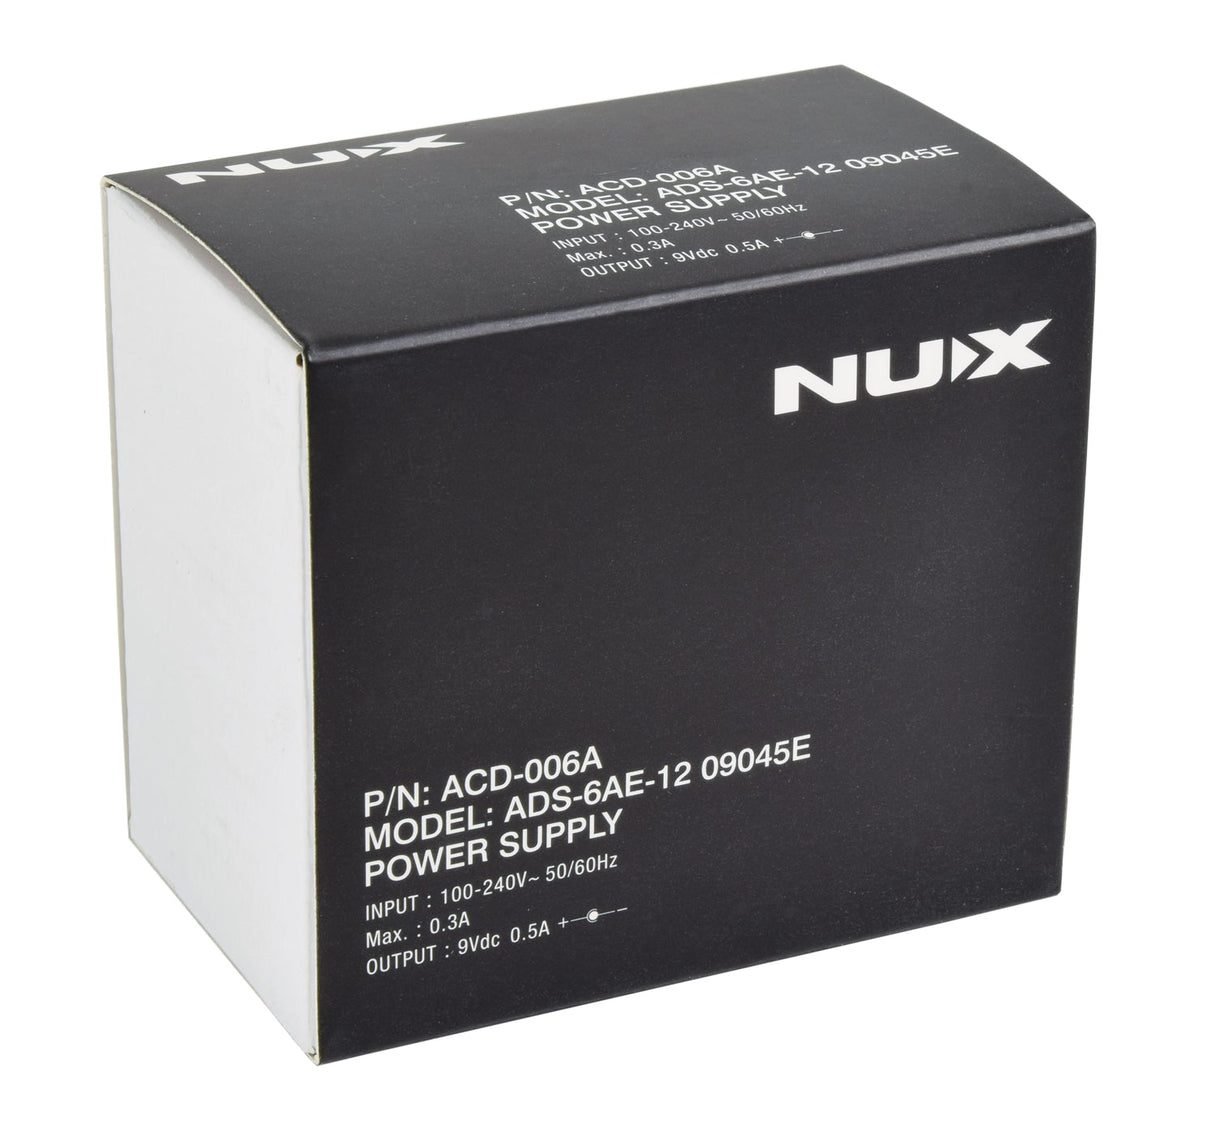 NU-X ADC-006A Adaptor for Effect Pedals 9Vdc 500mA - Power Supplies - NU-X